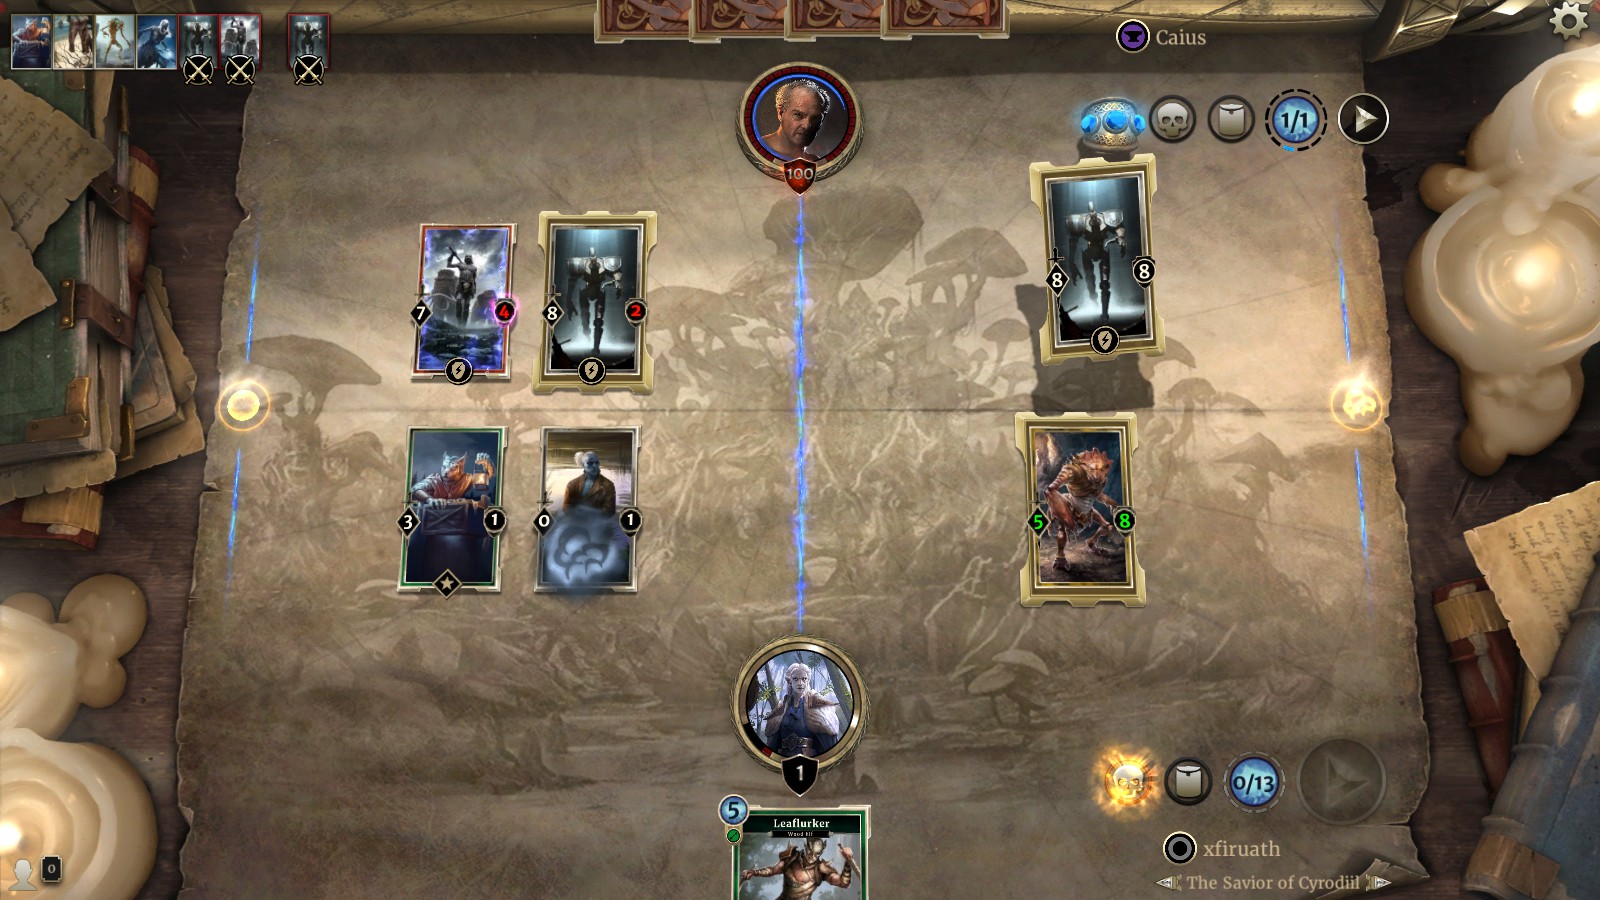 Image from a battle during the Dagoth Mastery Puzzle in Elder Scrolls Legends Houses of Morrowind